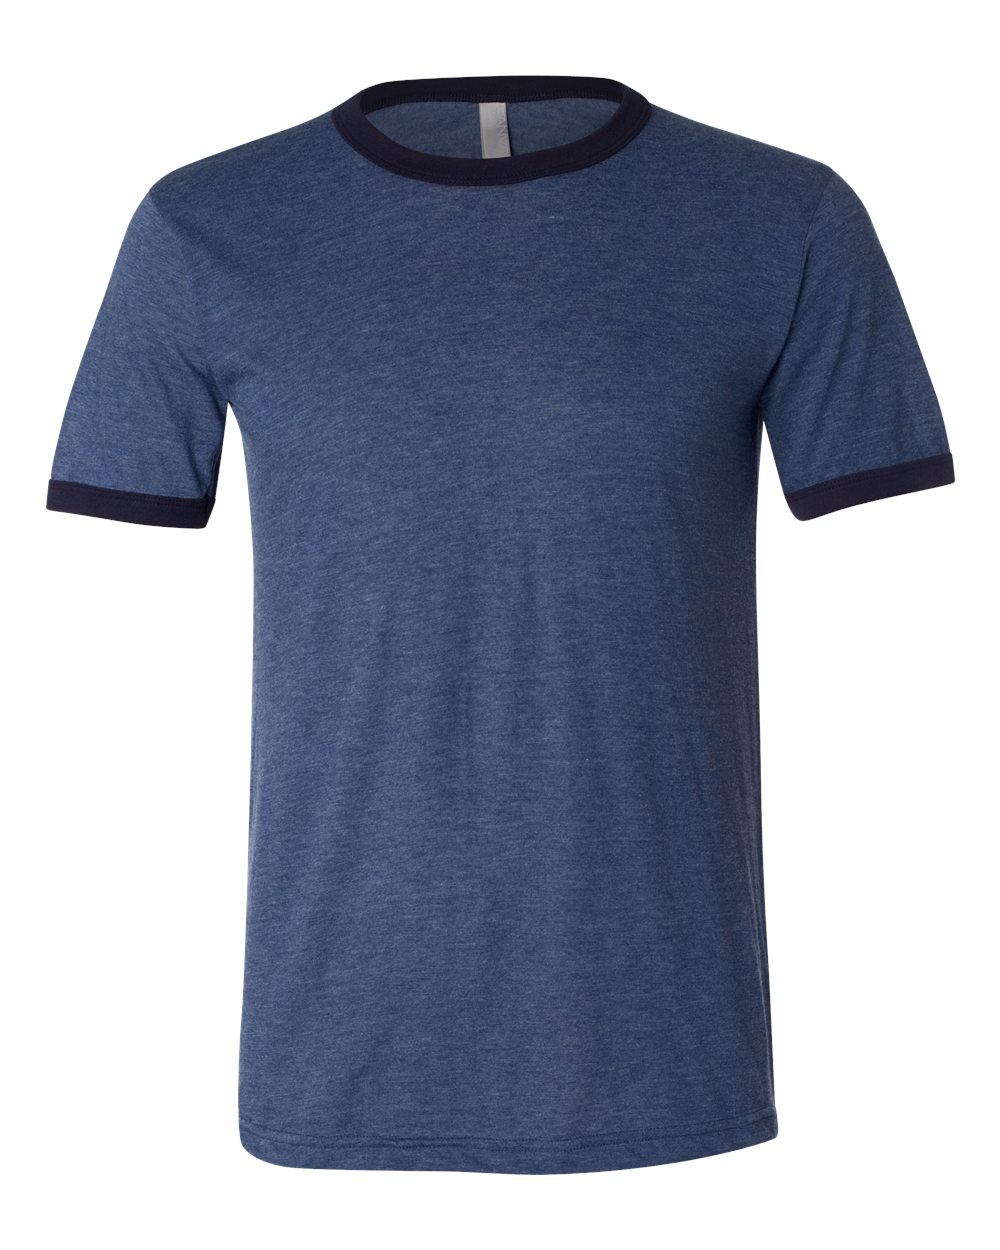 click to view heather navy/midnight